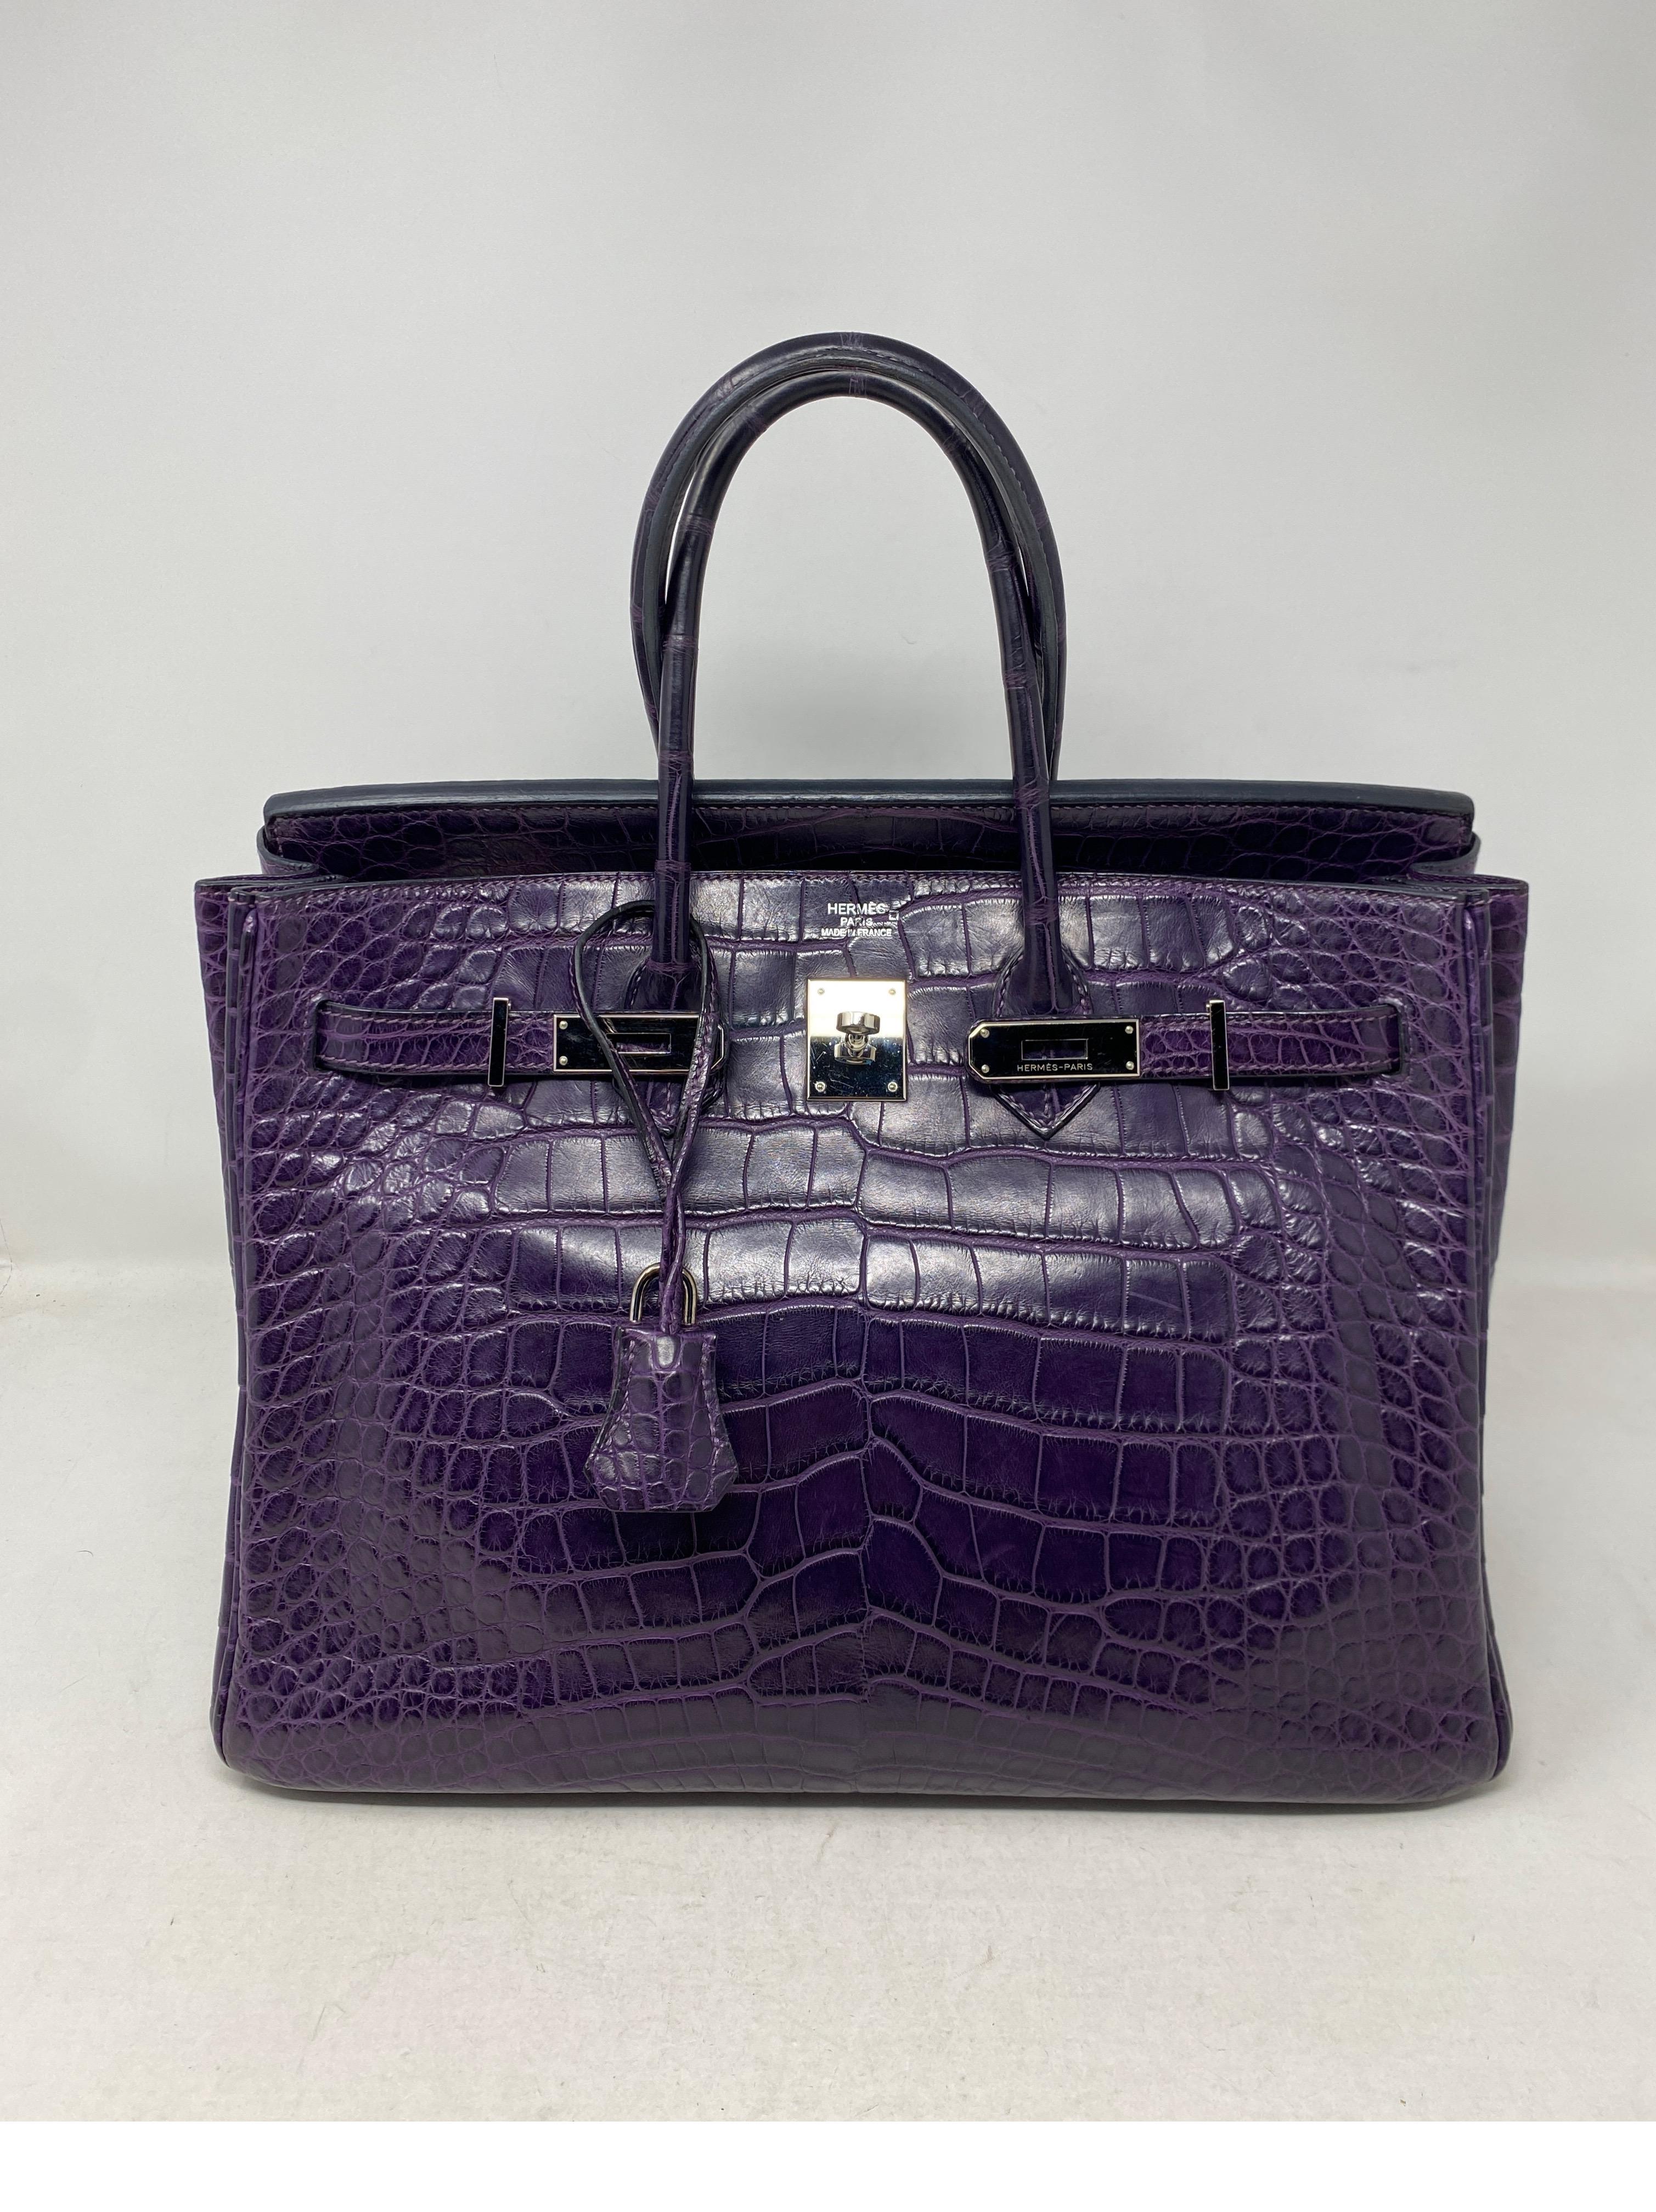 Hermes Amethyst Purple Crocodile Birkin 35 Bag. Gorgeous color and exotic skin. Excellent like new condition. Interior clean and unused. Palladium hardware. Great investment bag. Full set. Includes clochette, lock, keys, rain jacket, dust cover and